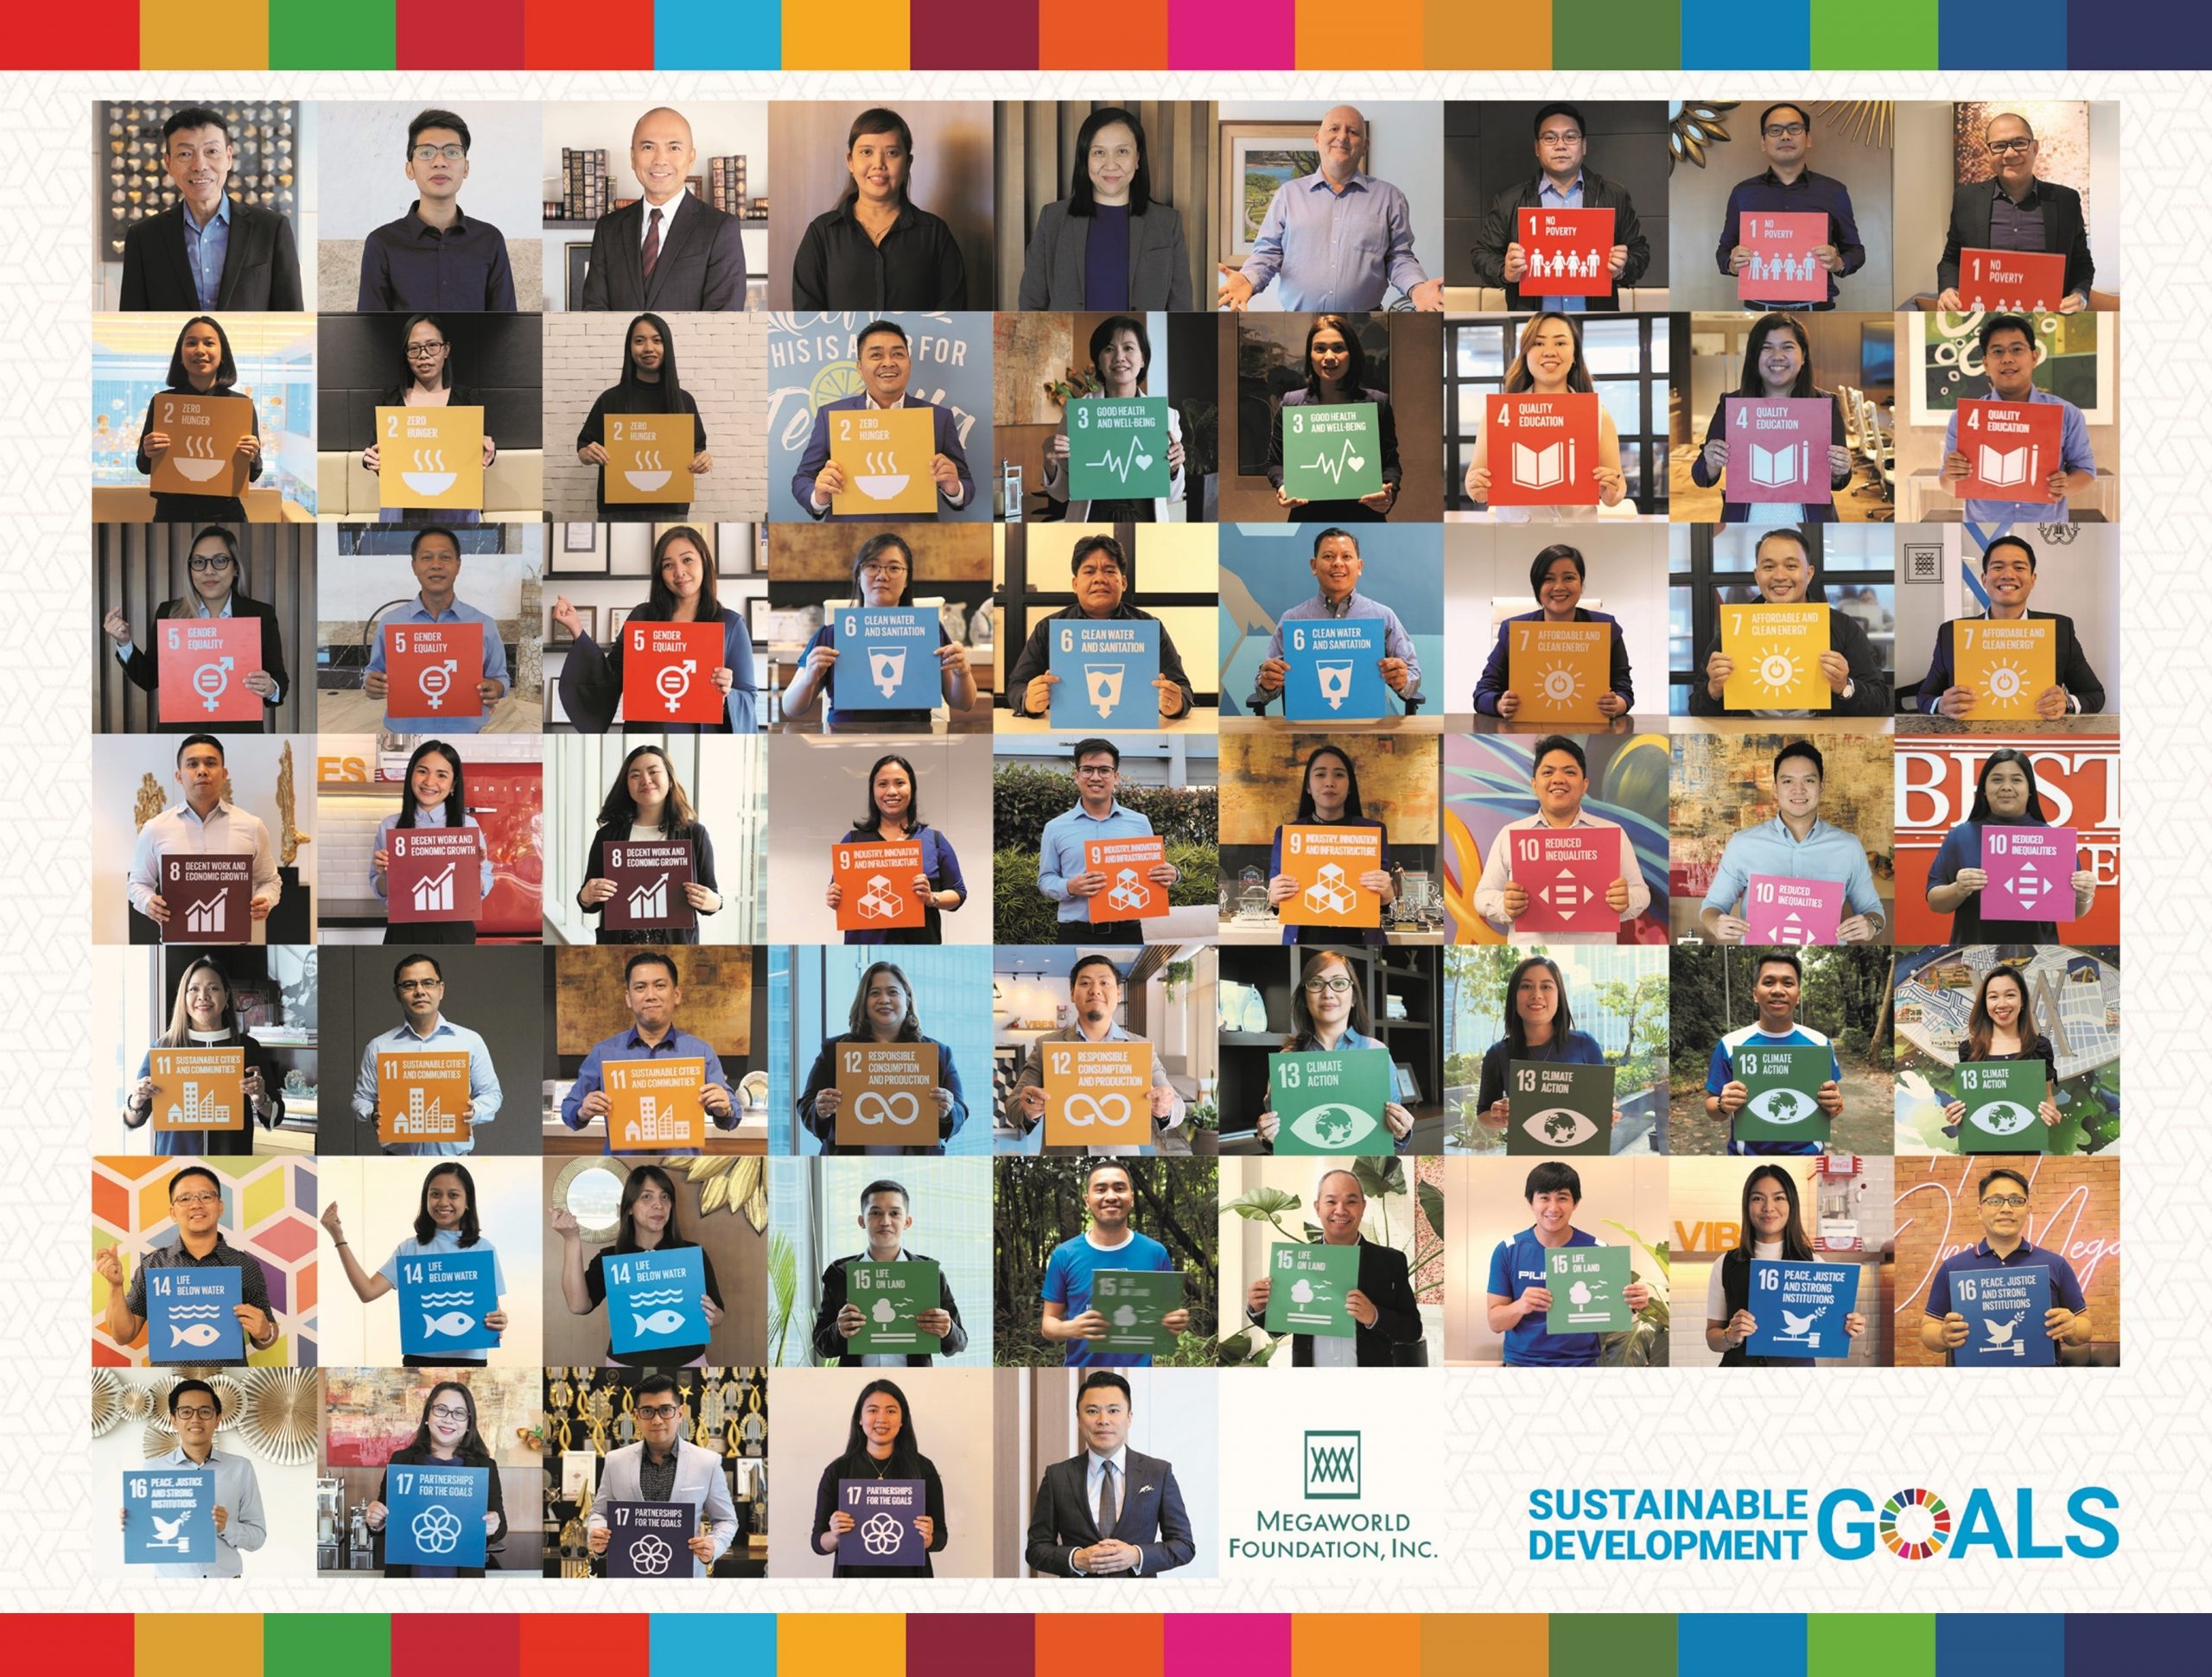 Megaworld Takes a Stand for the United Nations Sustainable Development Goals - Logo - https://s41078.pcdn.co/wp-content/uploads/2020/08/Video_Megaworld-Foundation-scaled.jpg